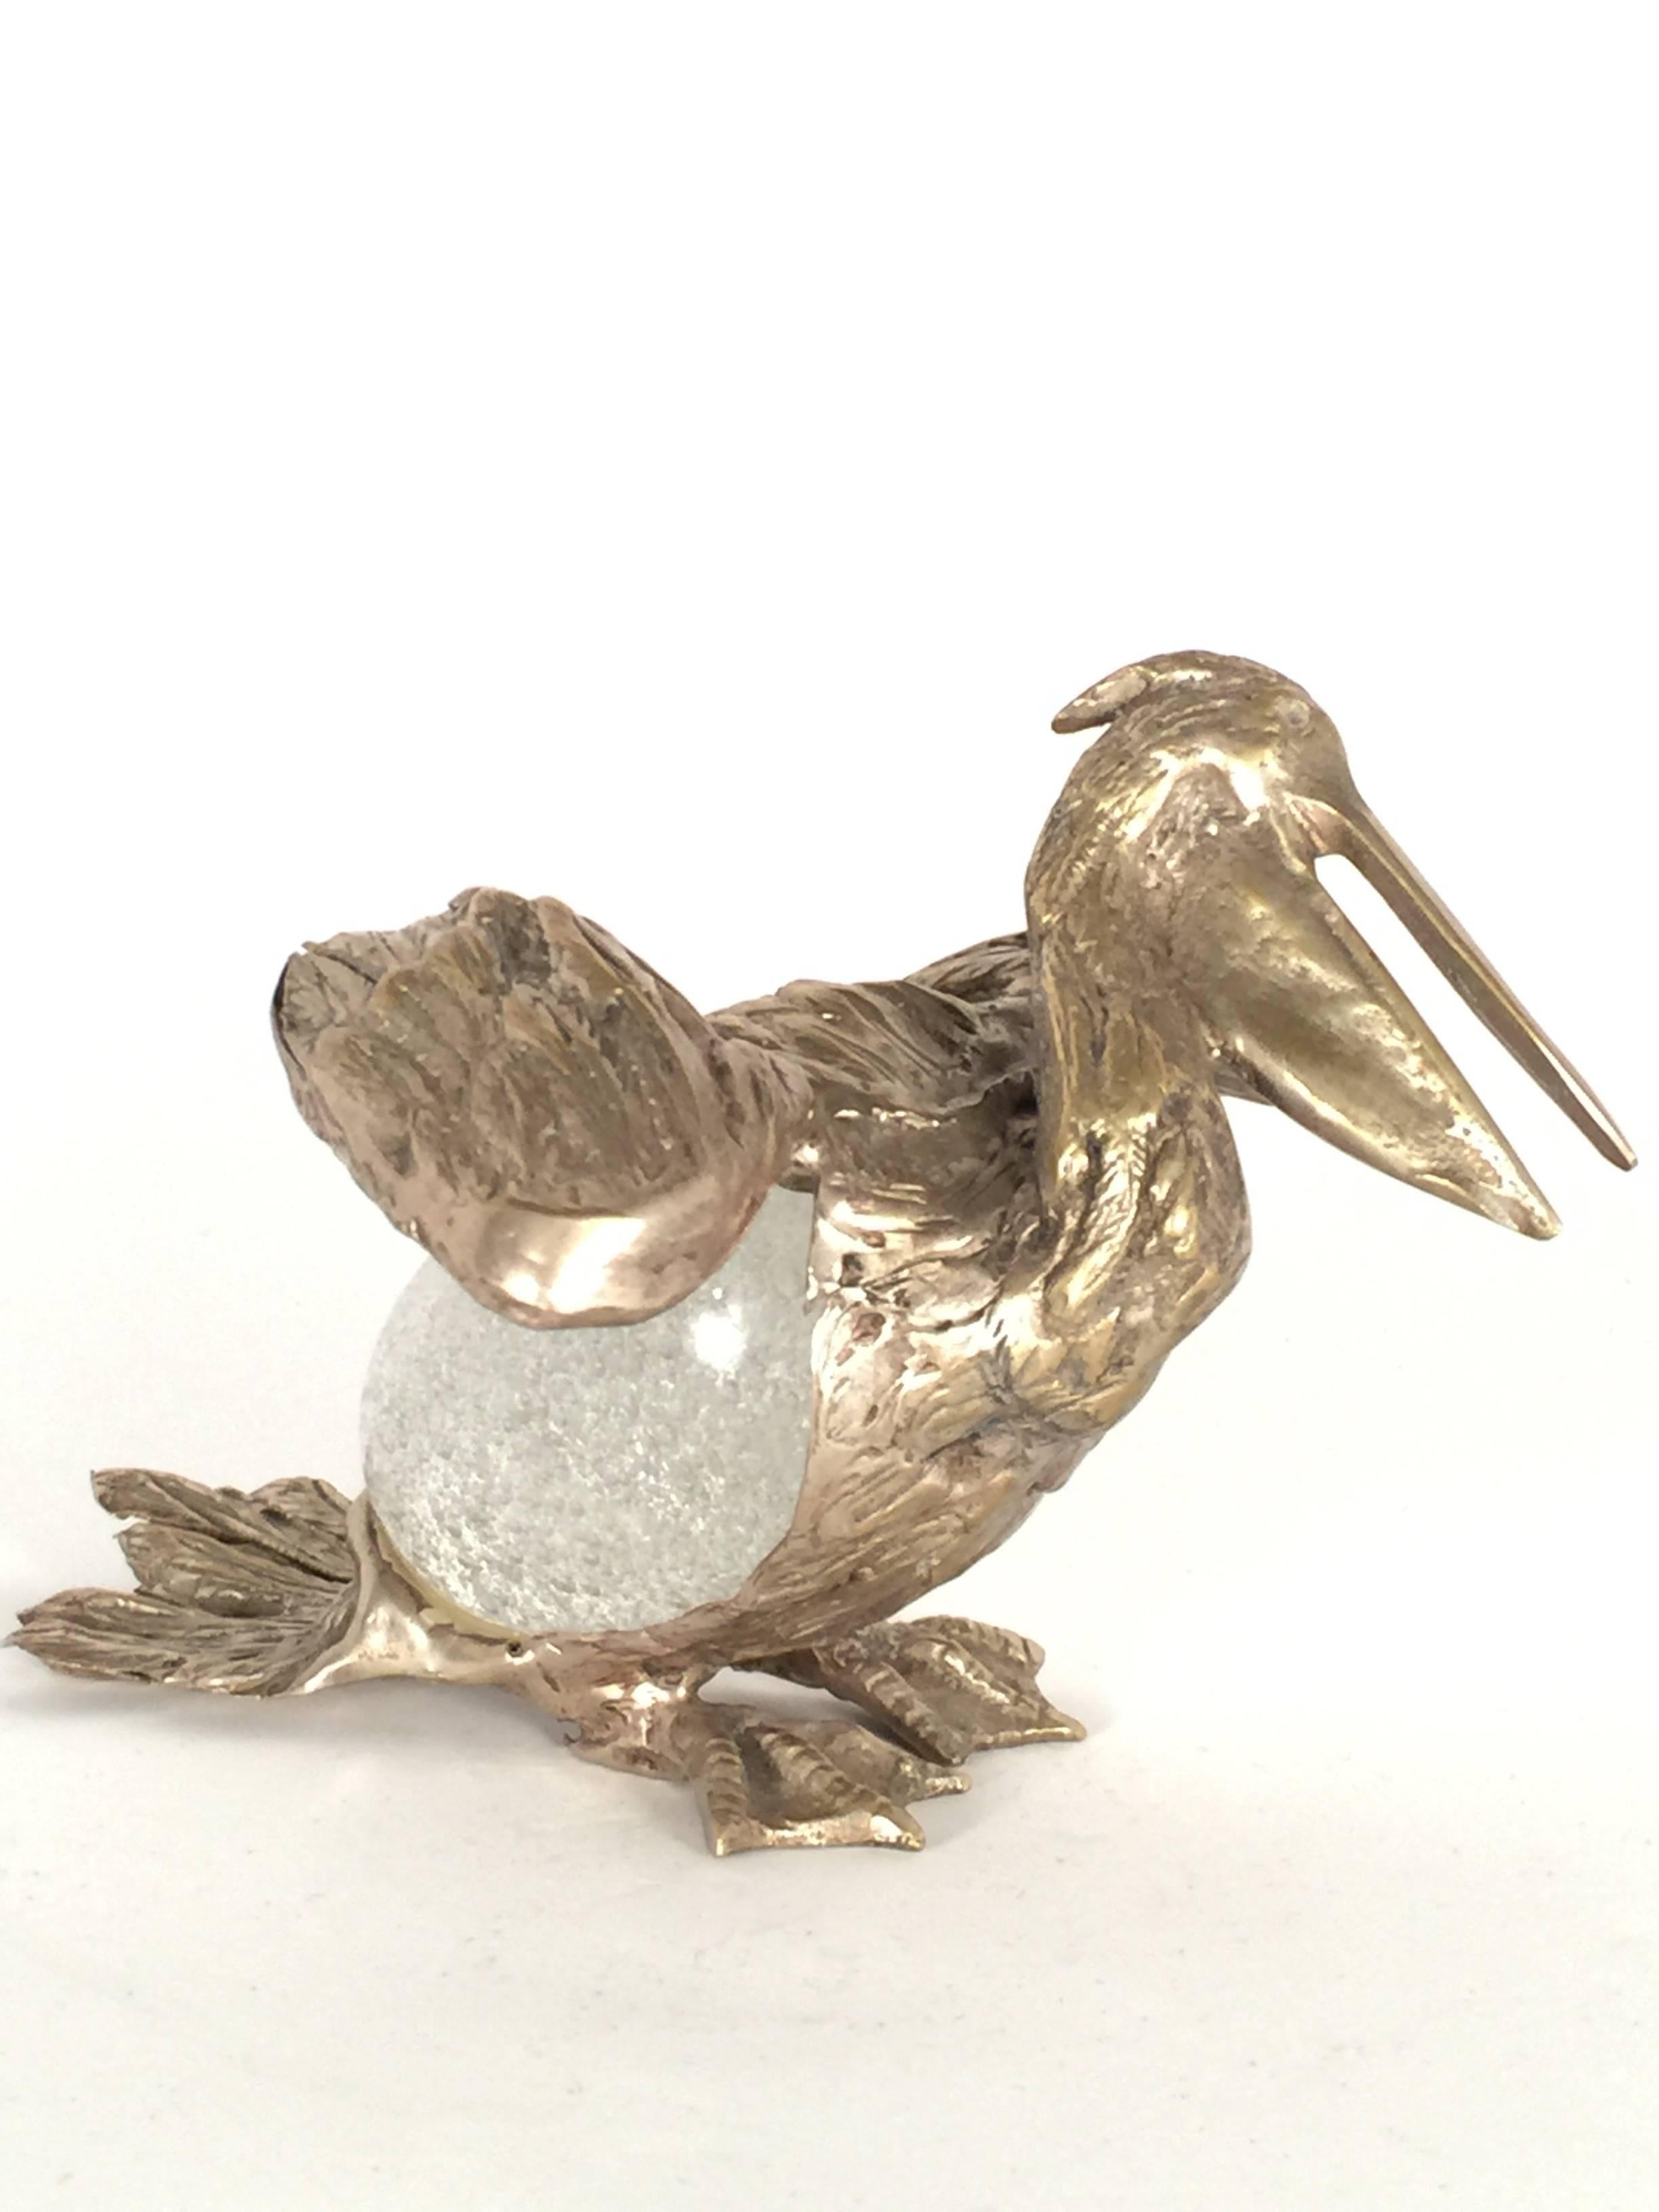 Rare Signed Gabriella Crespi Pelican sculpture.

1970s, made in Italy. 

This piece is in near excellent condition. 

An amazing and seldom piece.
 